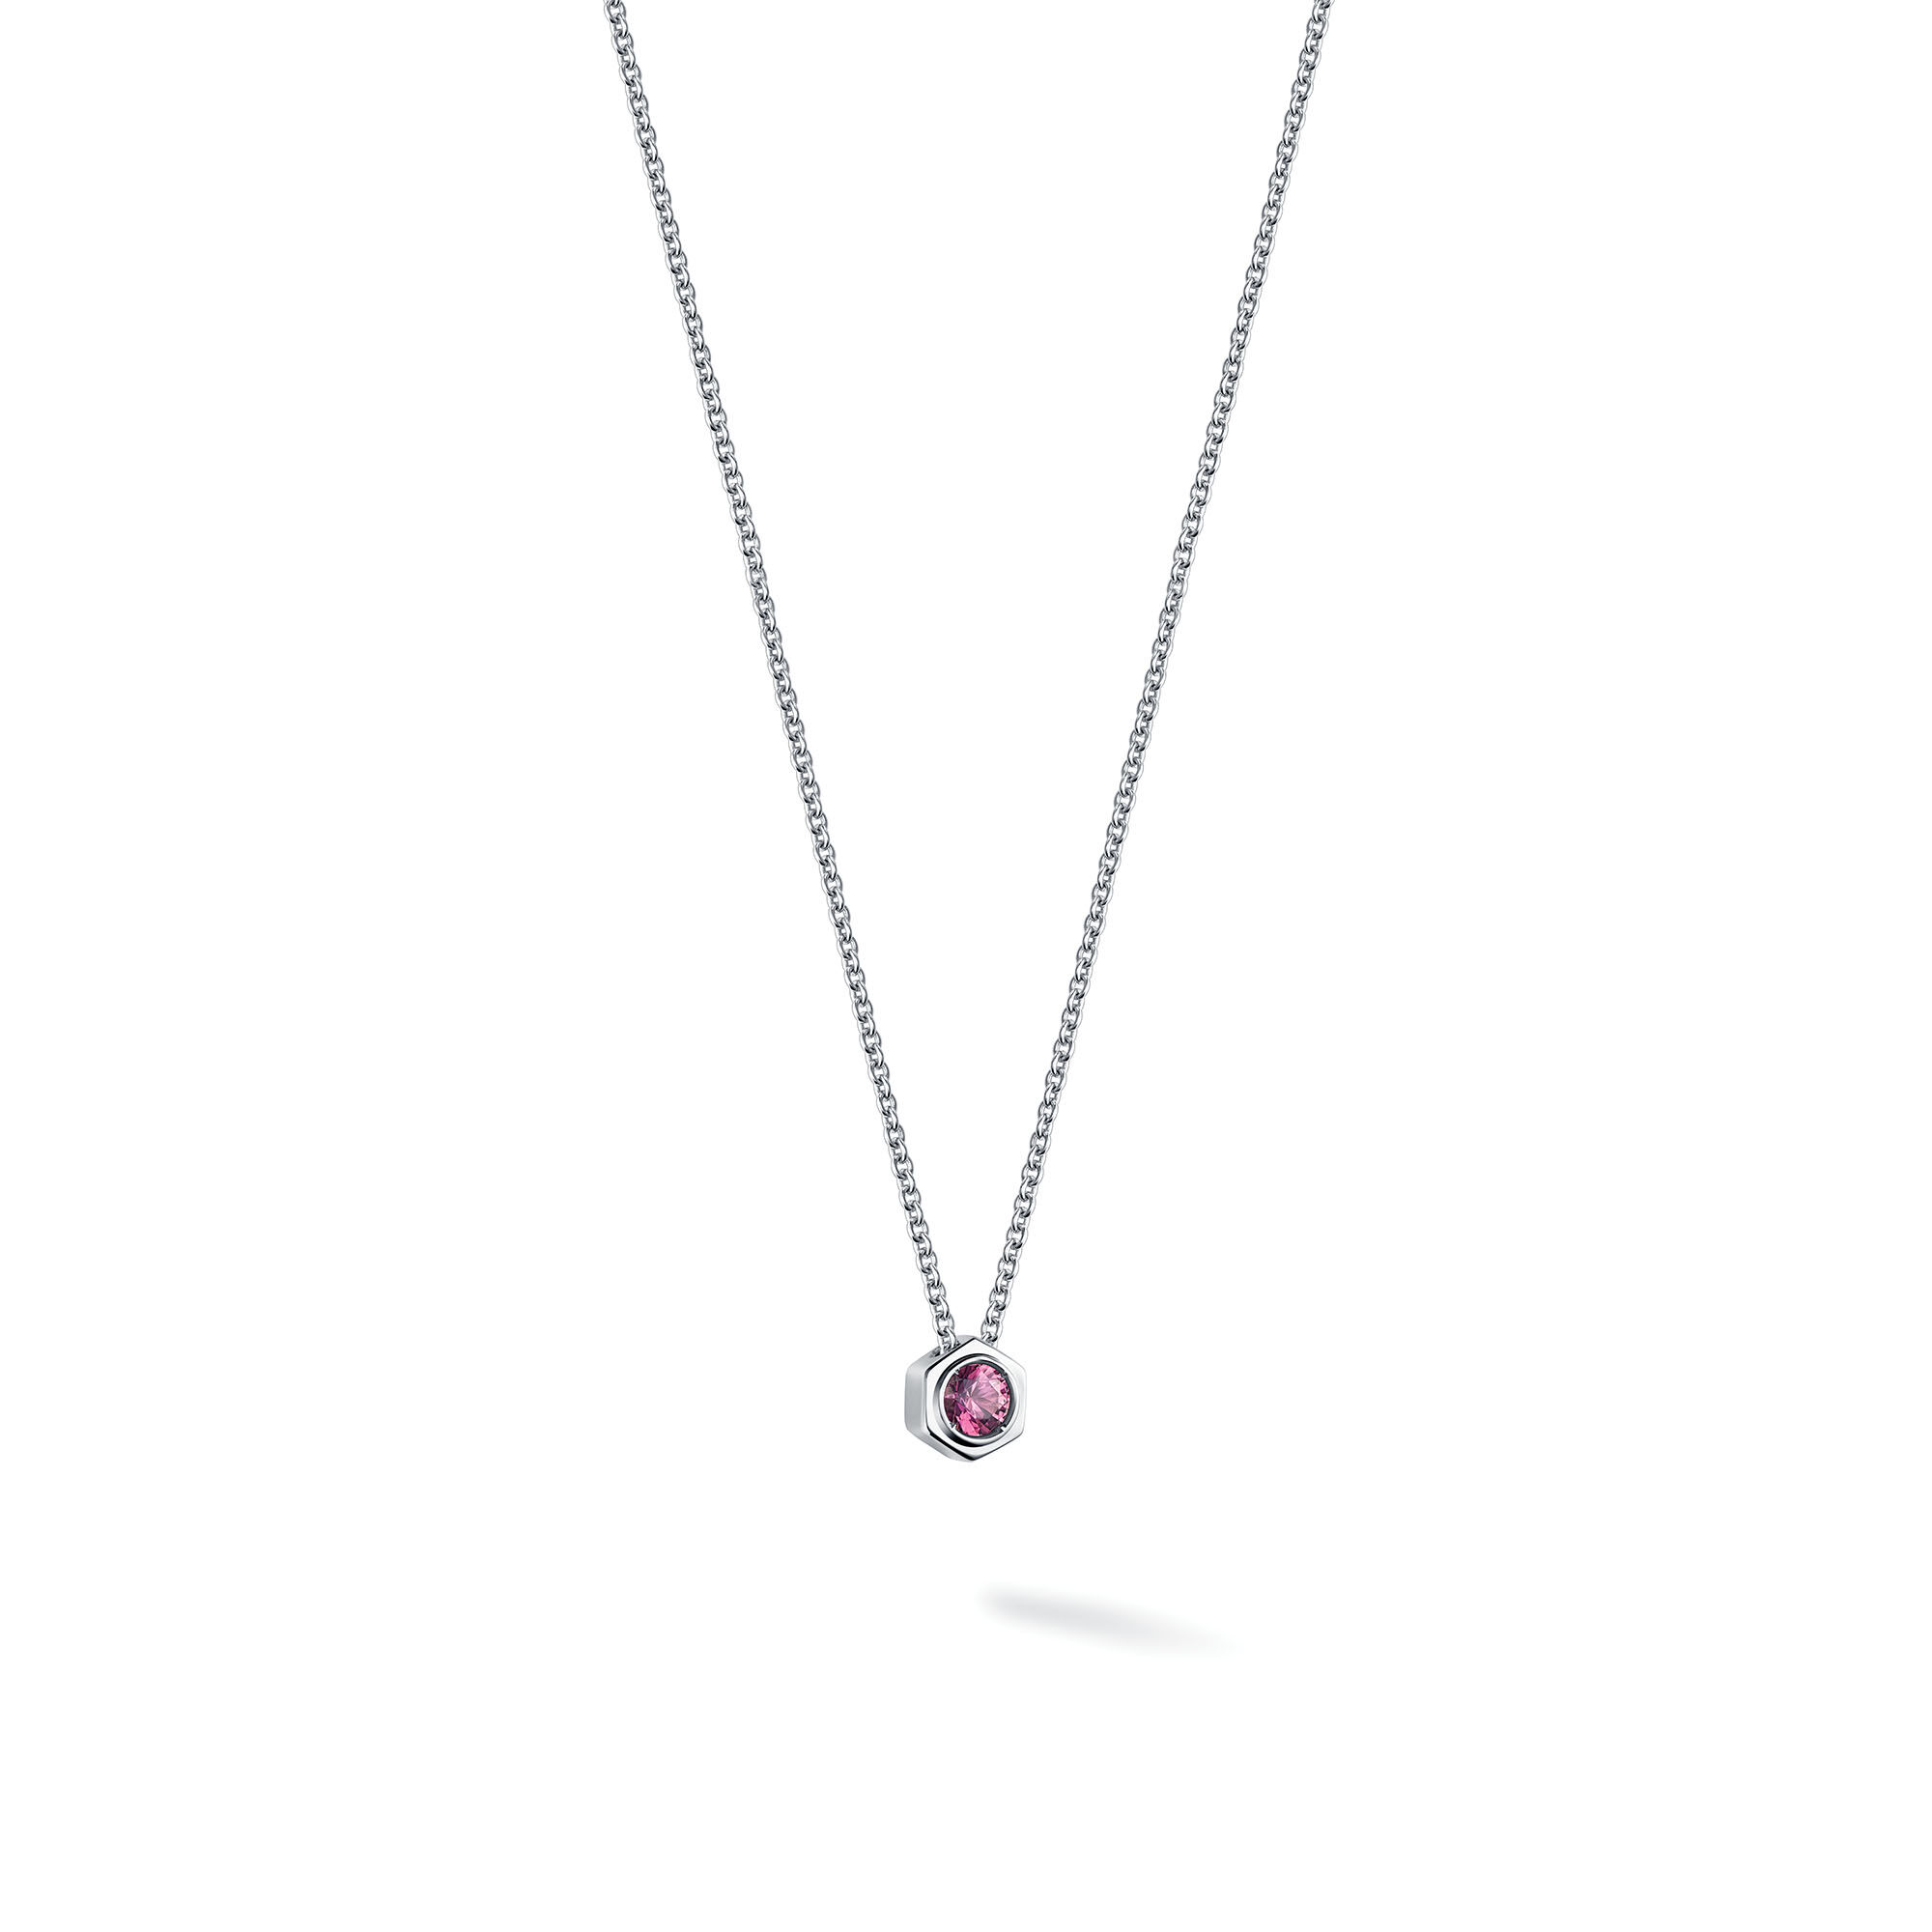 Birks Bee Chic | Pink Tourmaline and Silver Pendant